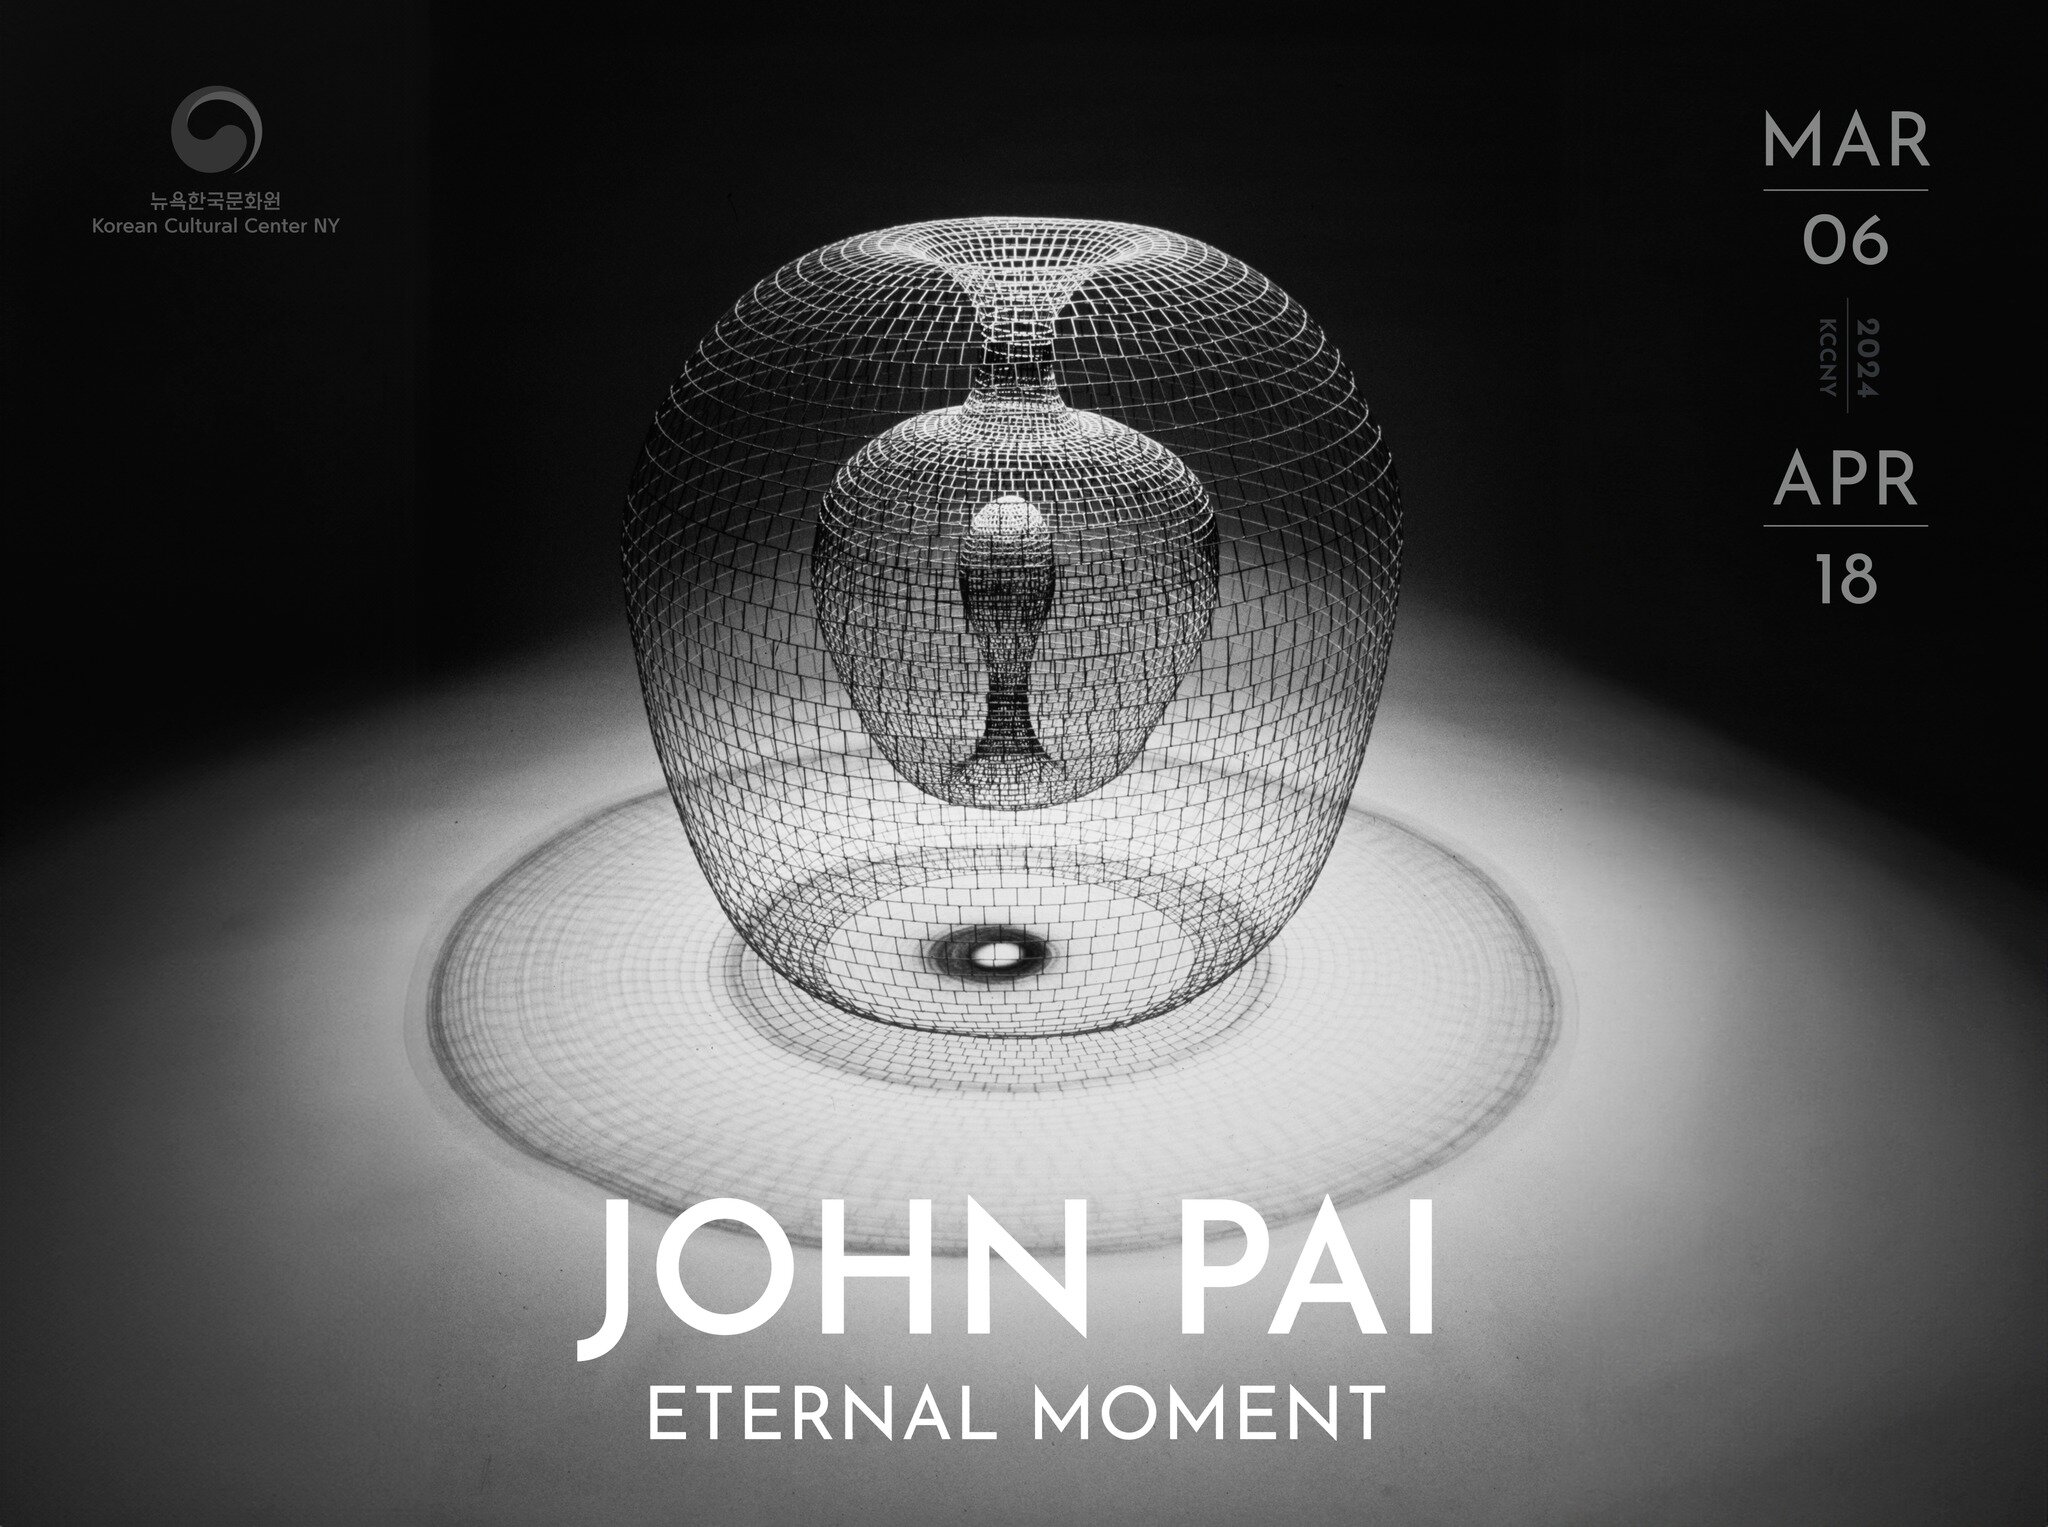 [Inaugural exhibition &ldquo;John Pai: Eternal Moment&rdquo; at the brand new gallery]
The Korean Cultural Center New York is delighted to present a retrospective &quot;John Pai: Eternal Moment&quot; as the very first exhibition at its new building! 